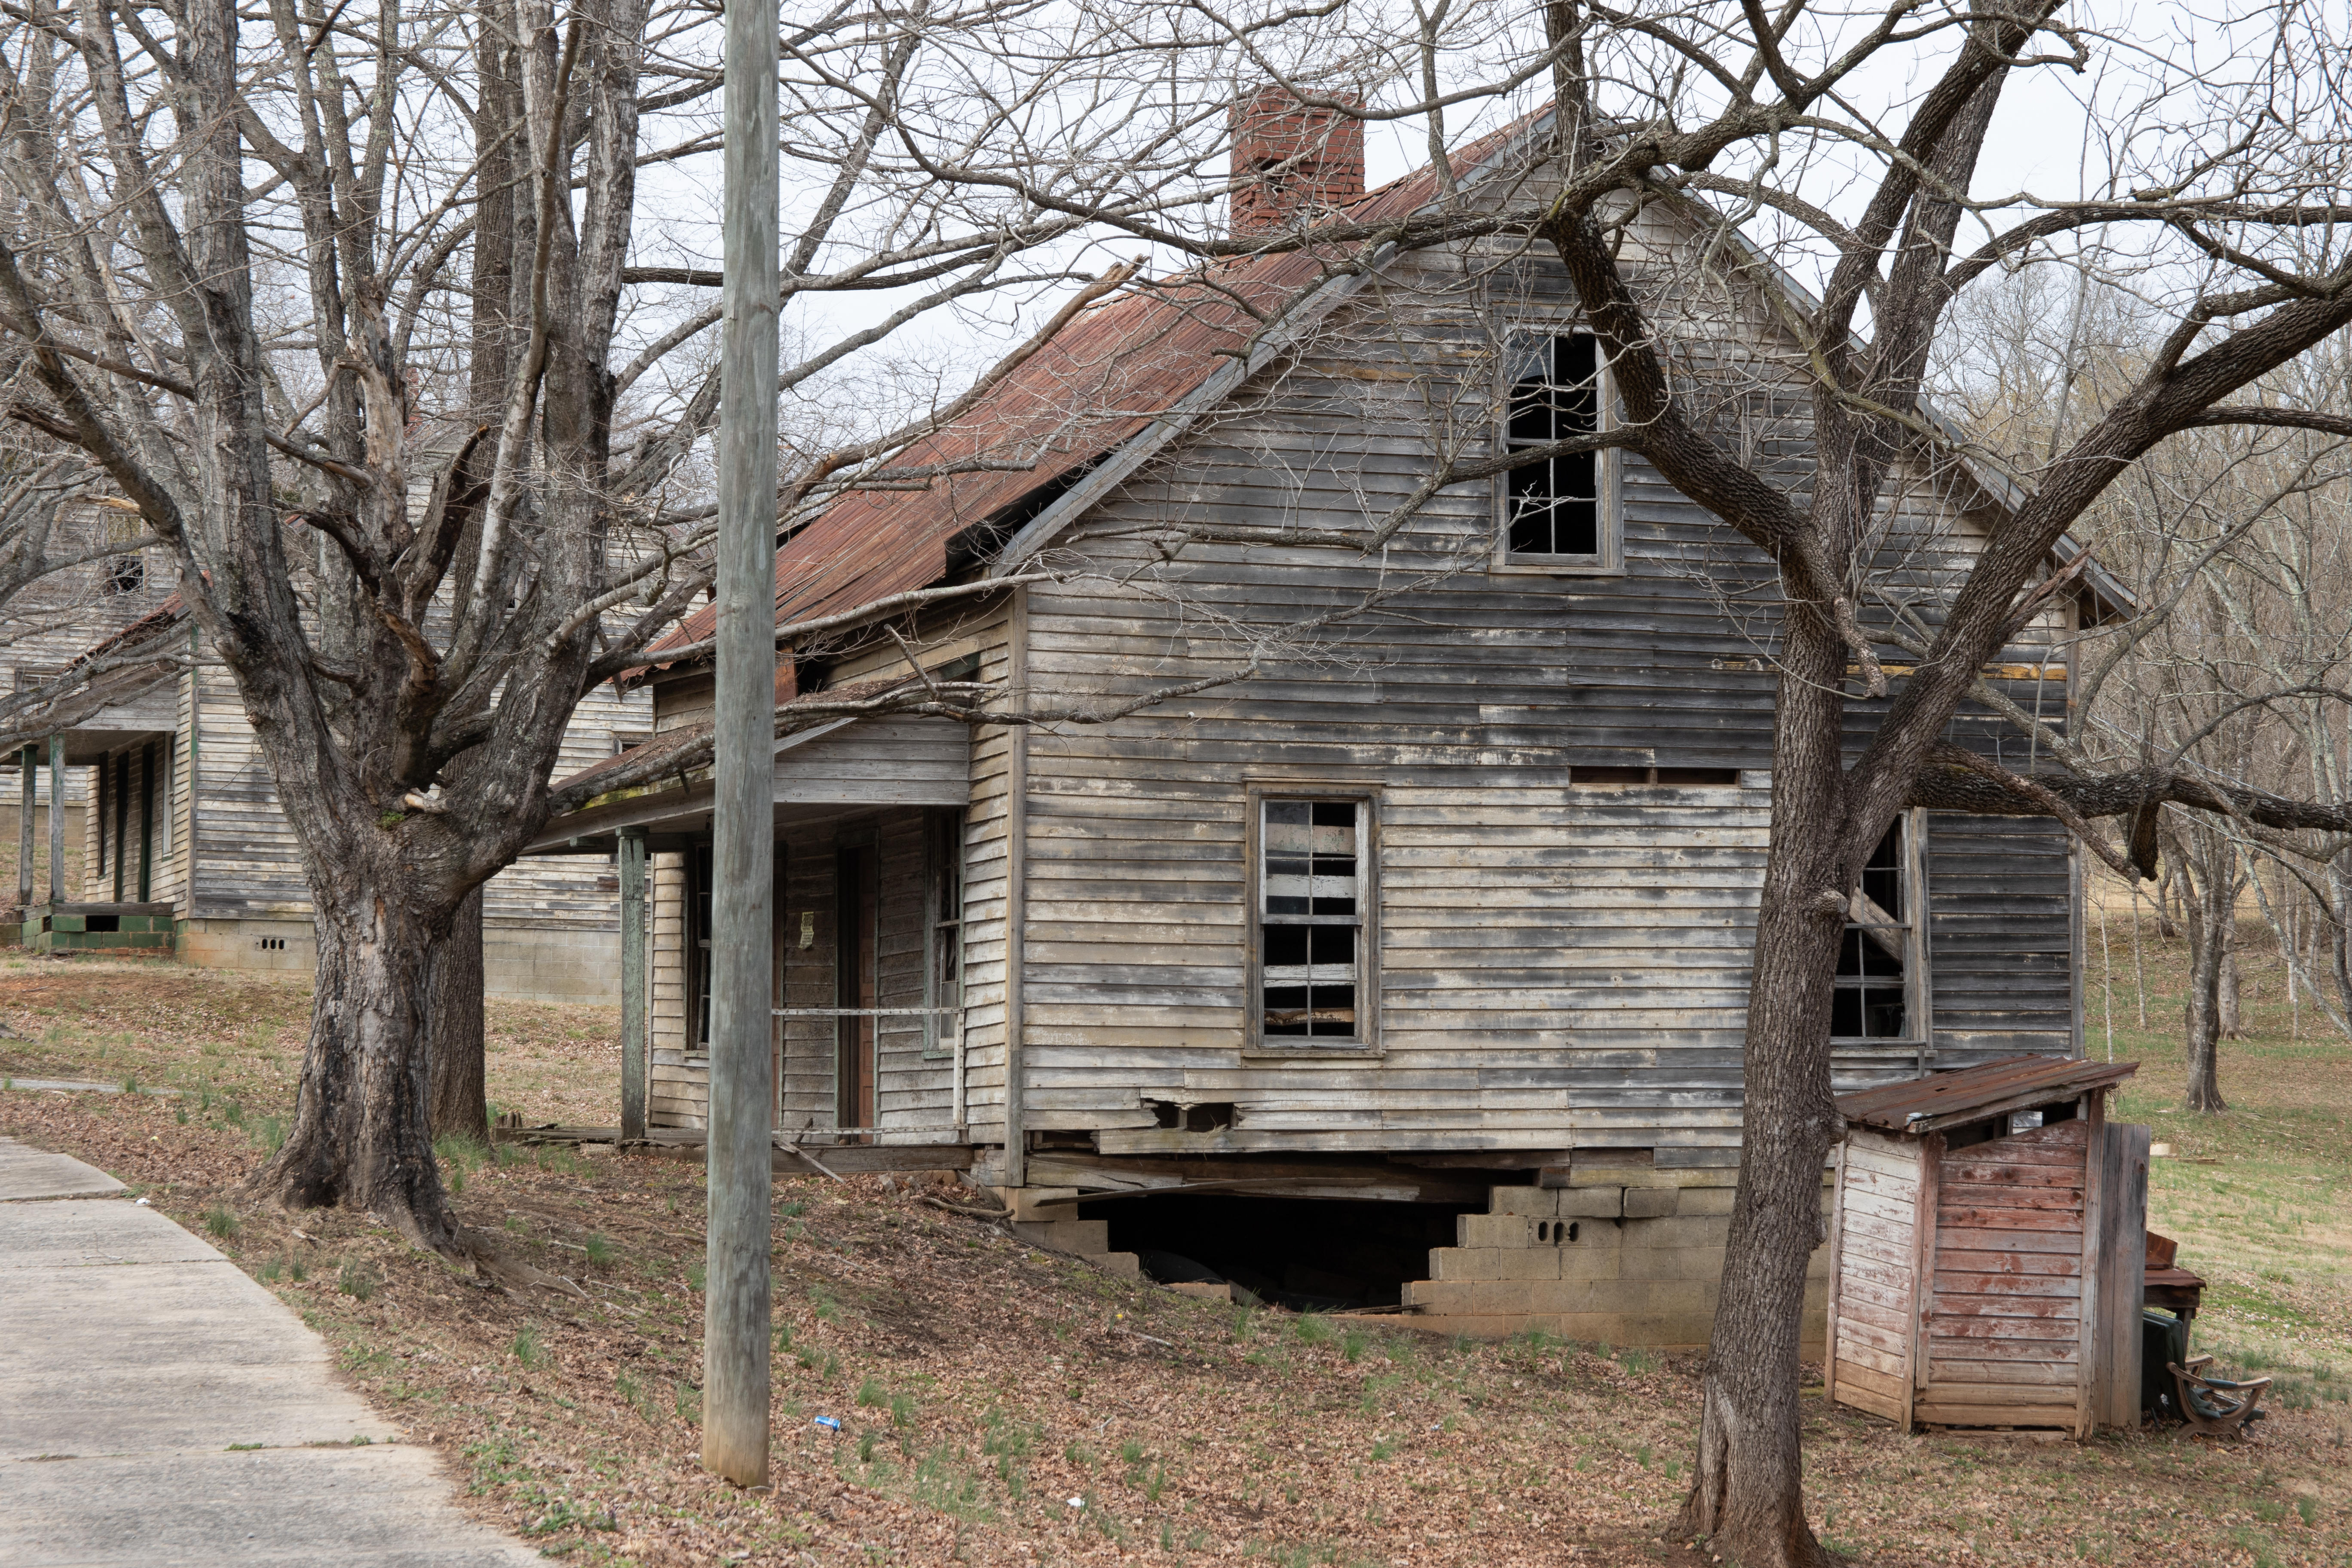 The houses in Henry Mill River Village are ramshackle